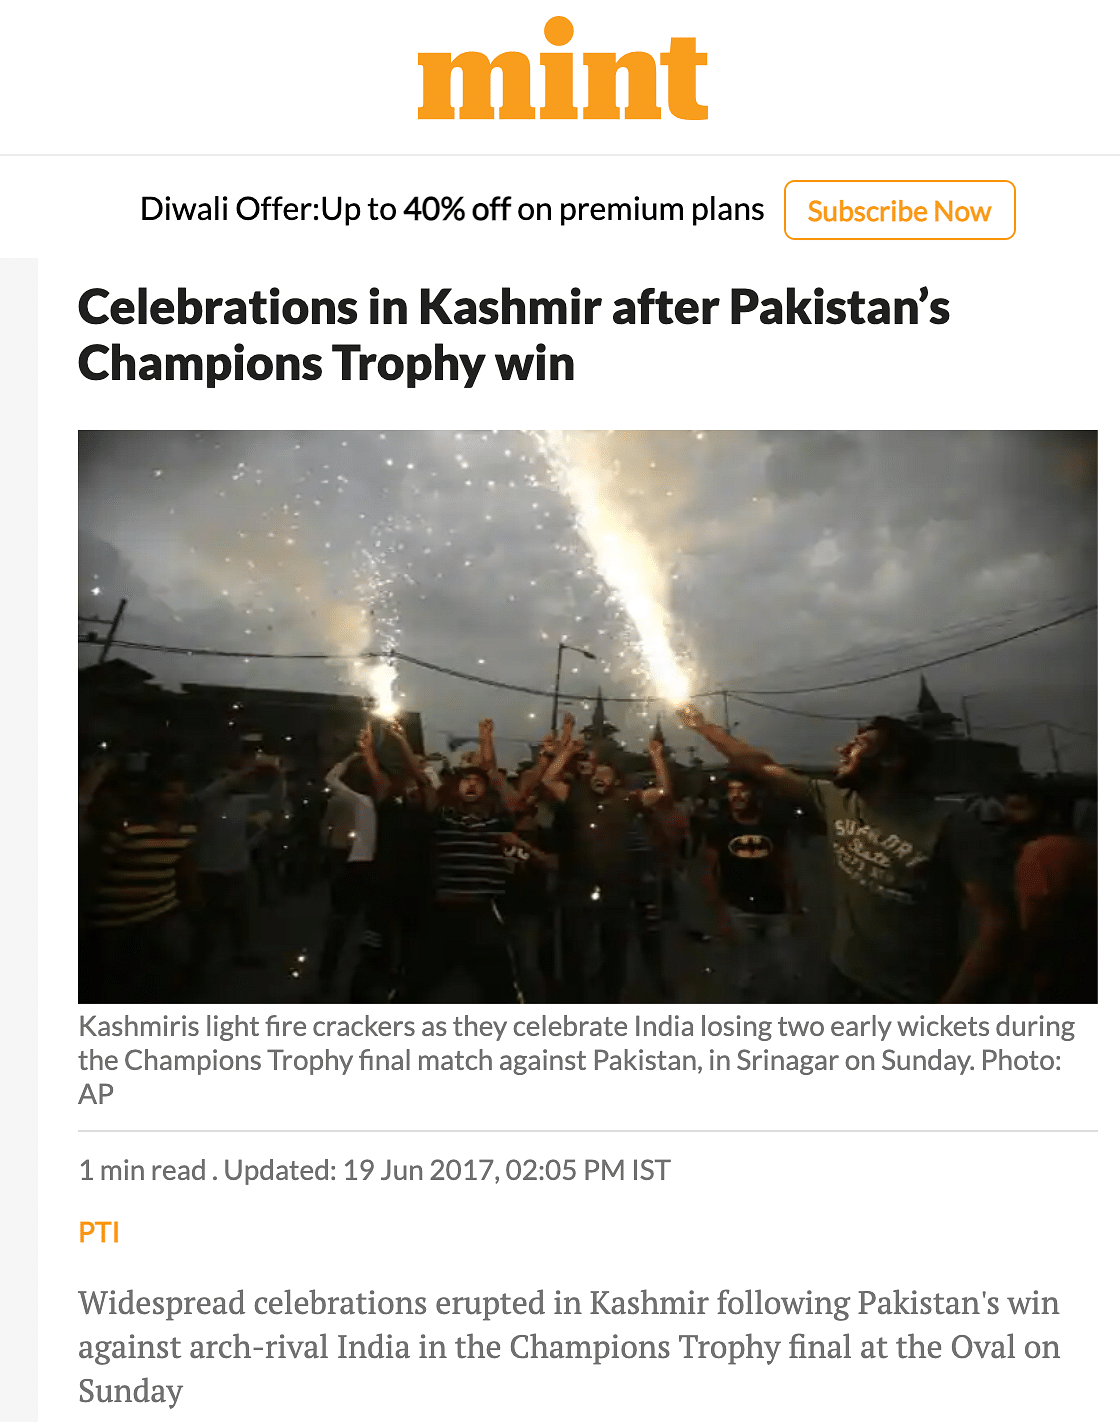 The video is from 2017 when Kashmiris celebrated Pakistan's win over India in the Champions Trophy finals.